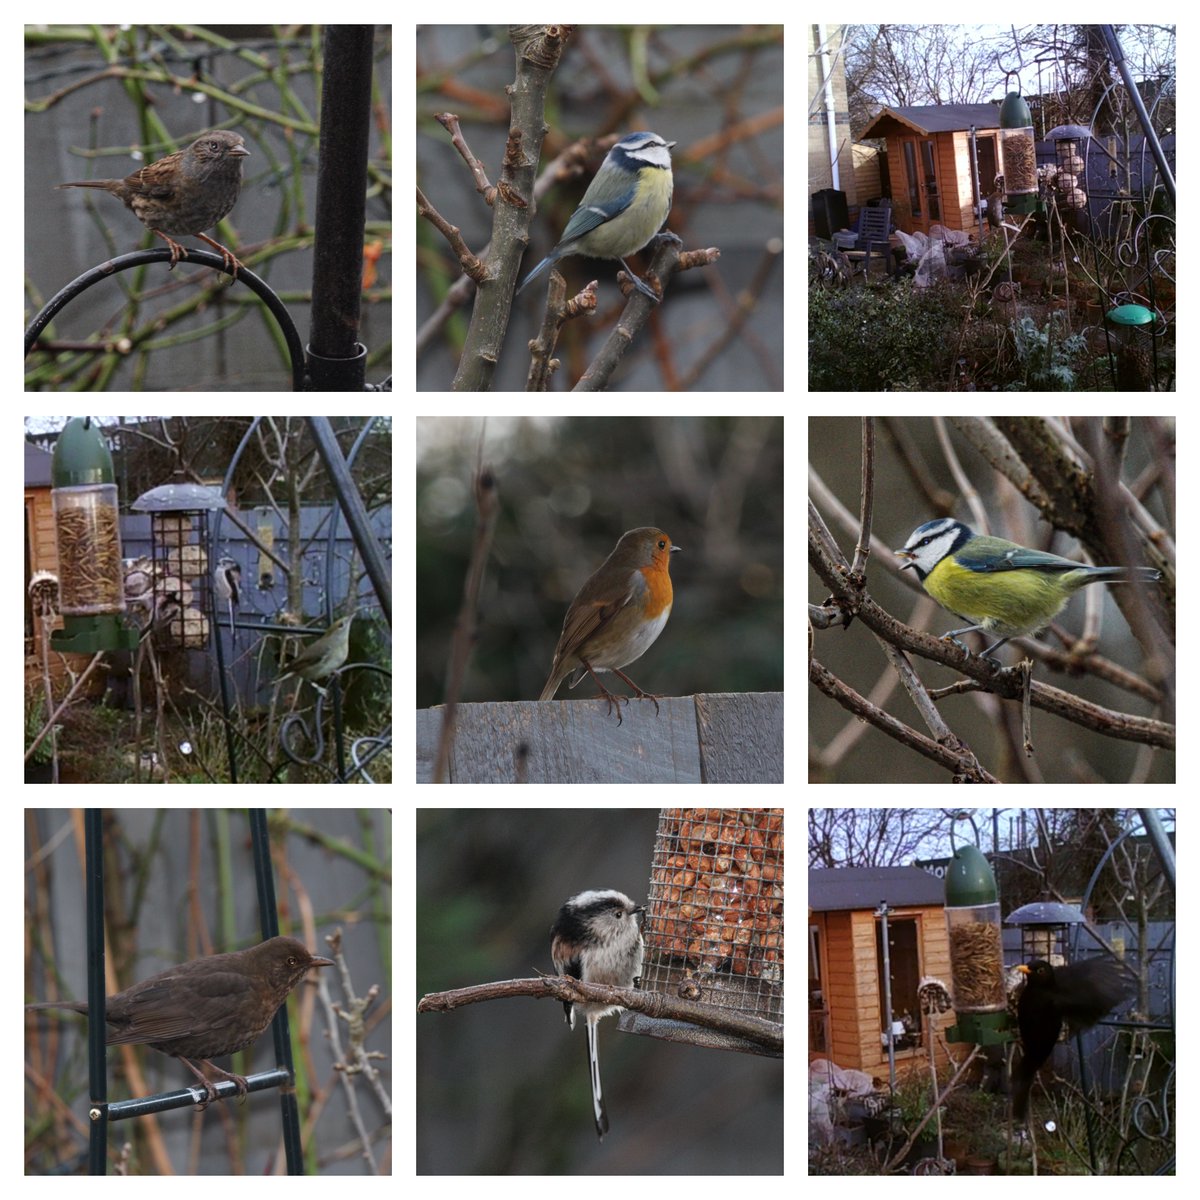 I spent a happy hour doing my #BigGardenBirdWatch this afternoon counting 6 blue, 2 coal, 2 great & 10 long tailed tits, 1 wren, 2 robins, 1 blackcap, 4 dunnocks. 2 magpies, 3 herring gulls, 2 blackbirds, 2 goldfinches, 3 siskins, 2 wood pigeons & 1 collared dove @Natures_Voice